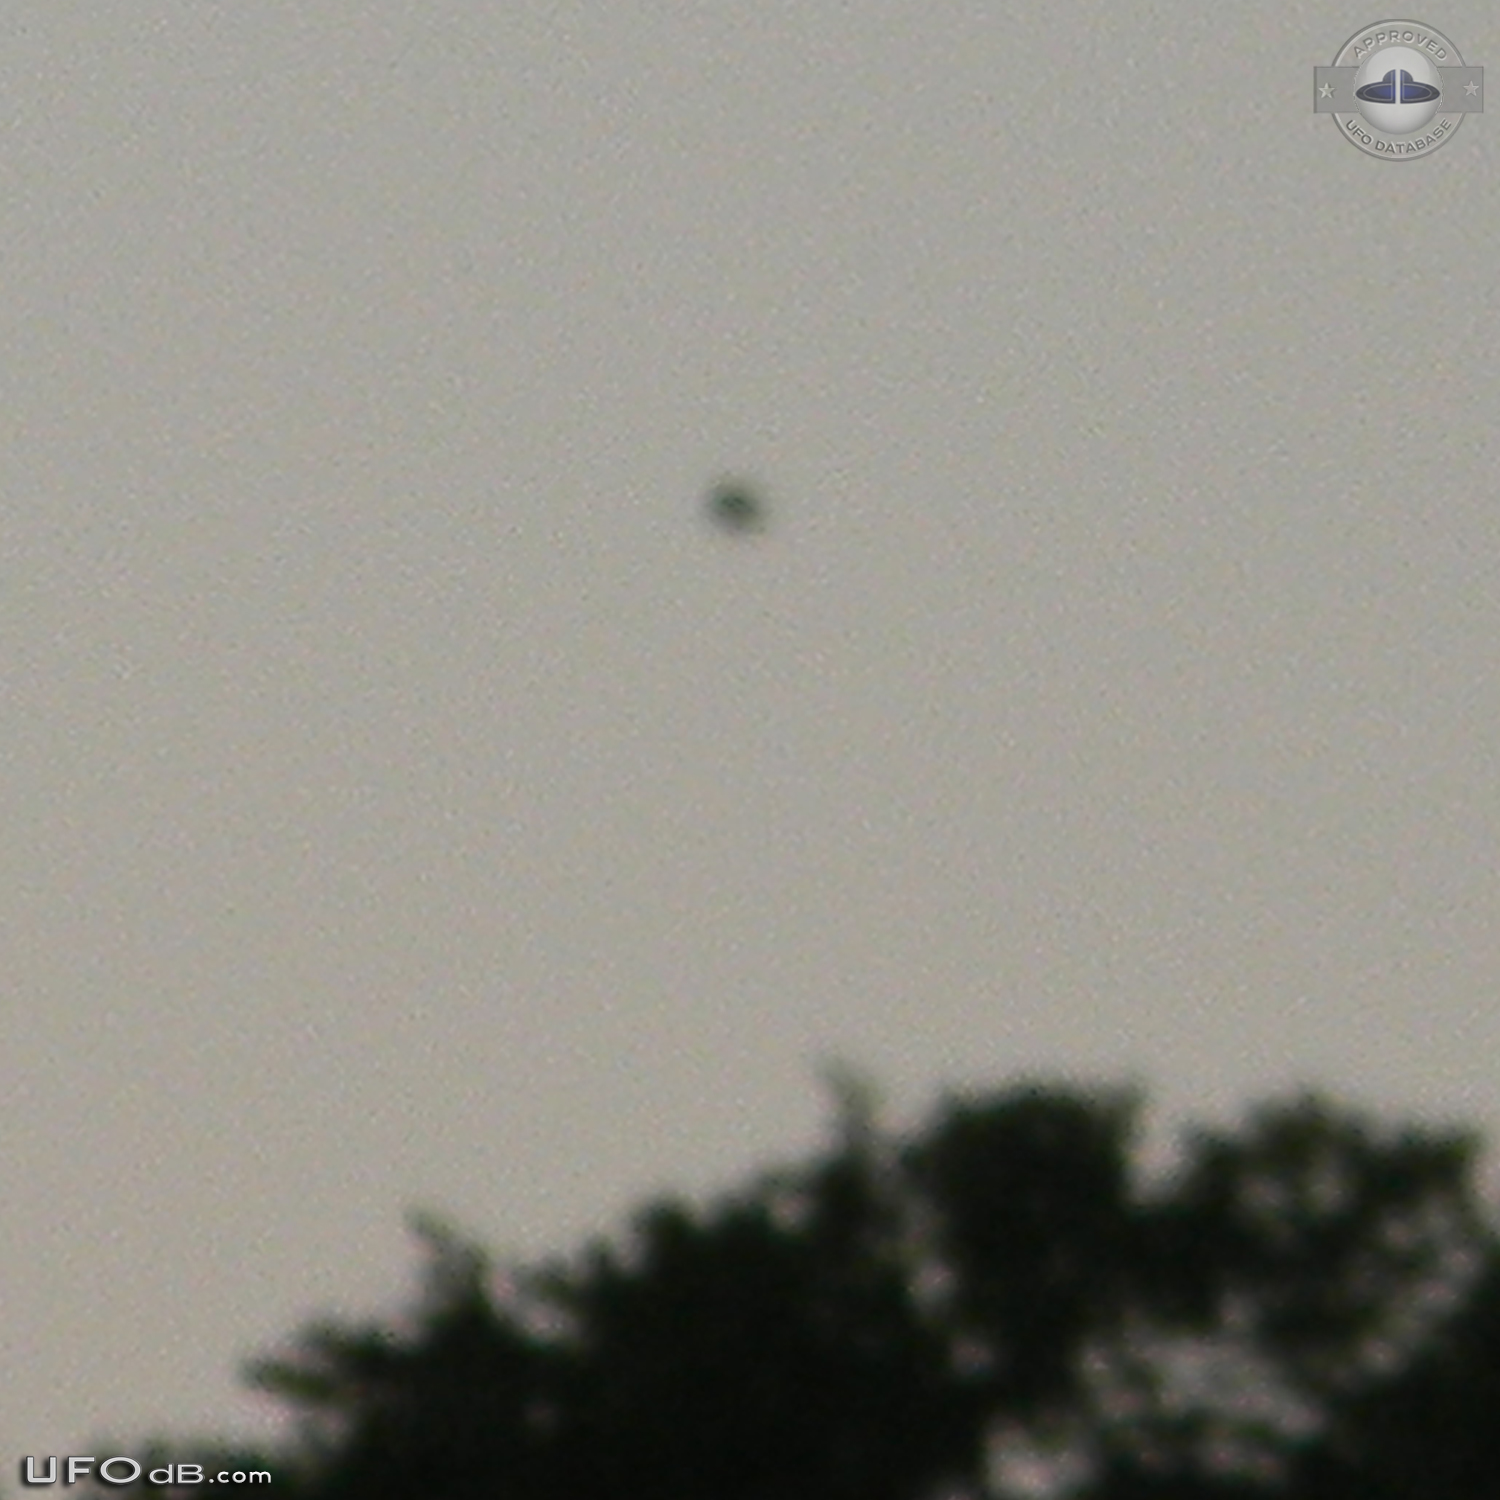 UFO hovered over Lake Lewisville in Texas and extended appendage 2014 UFO Picture #570-2